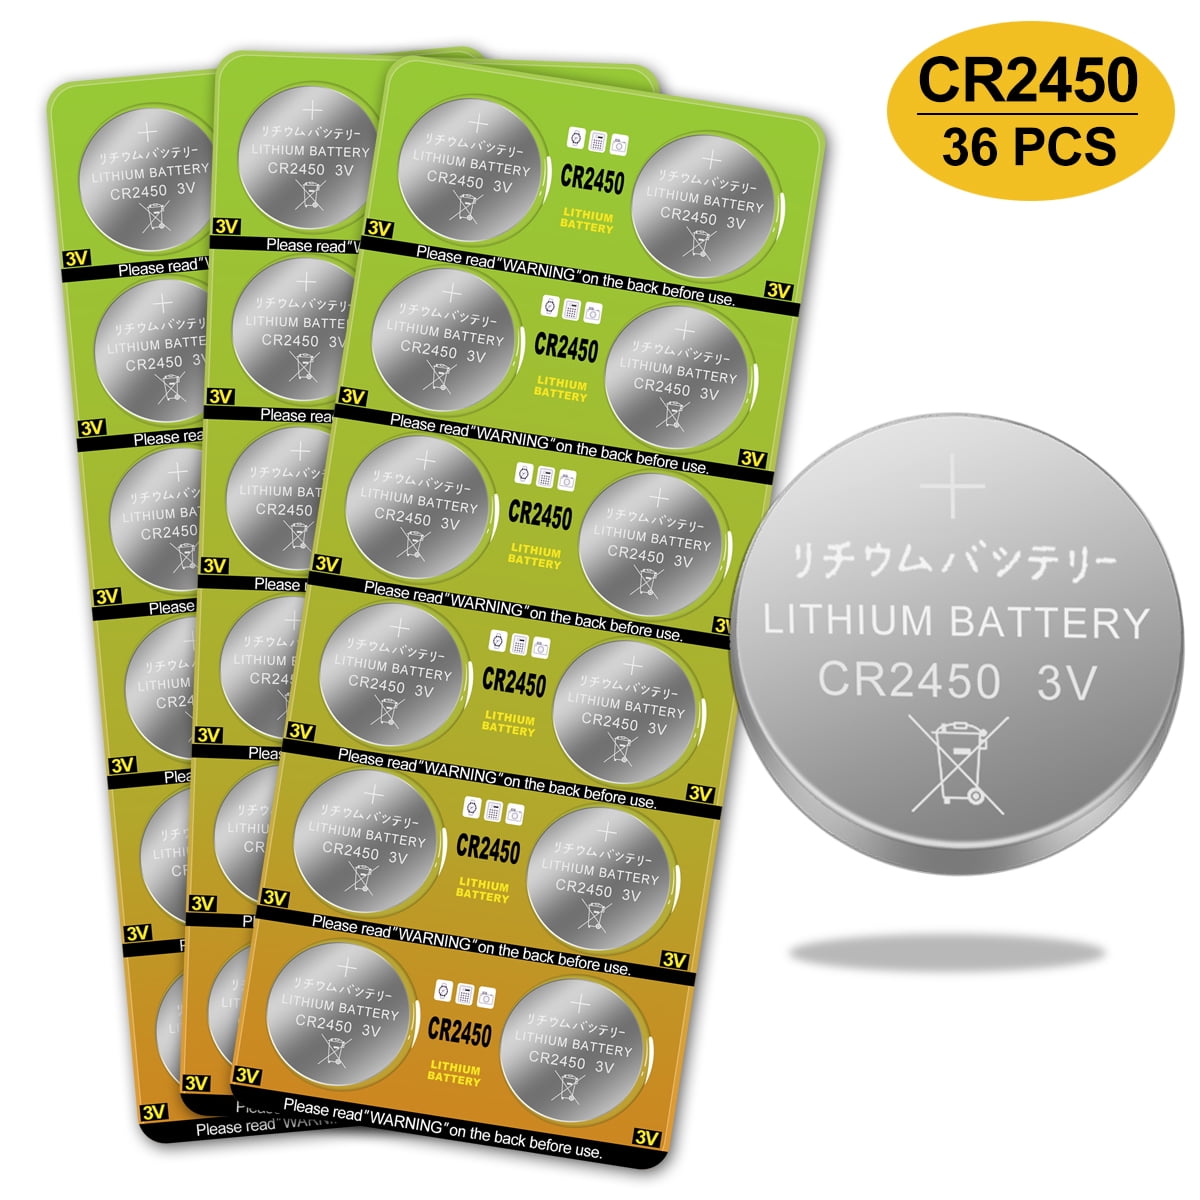 CR2450 Battery 3v Lithium Coin Cell Batteries - High Capacity 700mAh Button  Cell Battery for Flameless Tea Light Candles, Remote, Window Sensor 36 Pack  